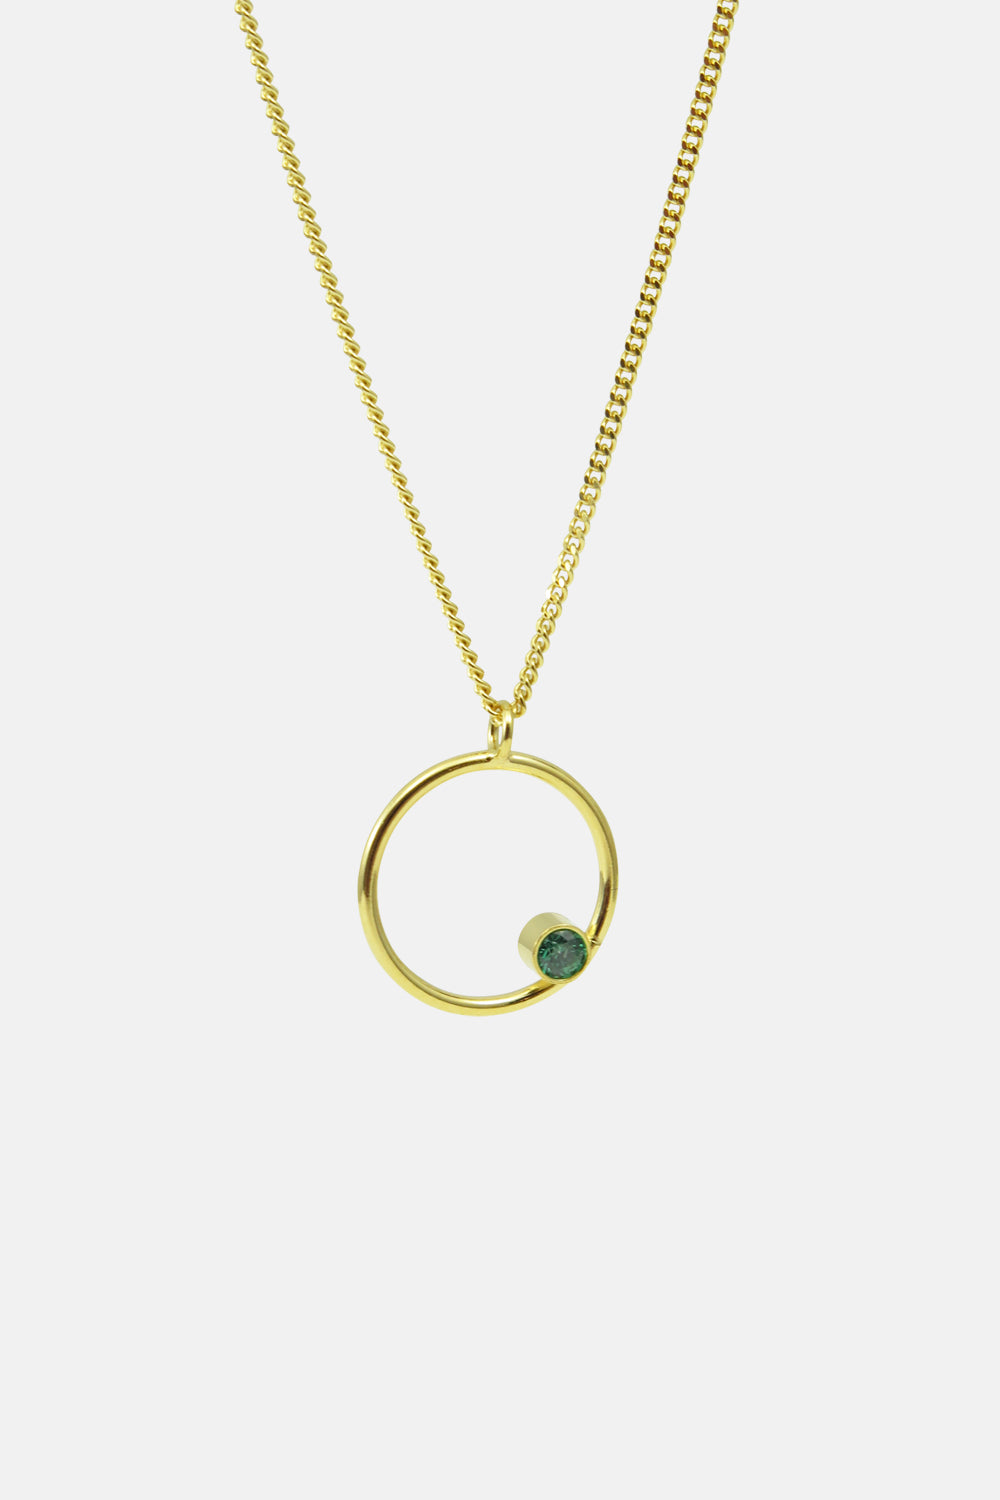 Circle with stone necklace, green, pink